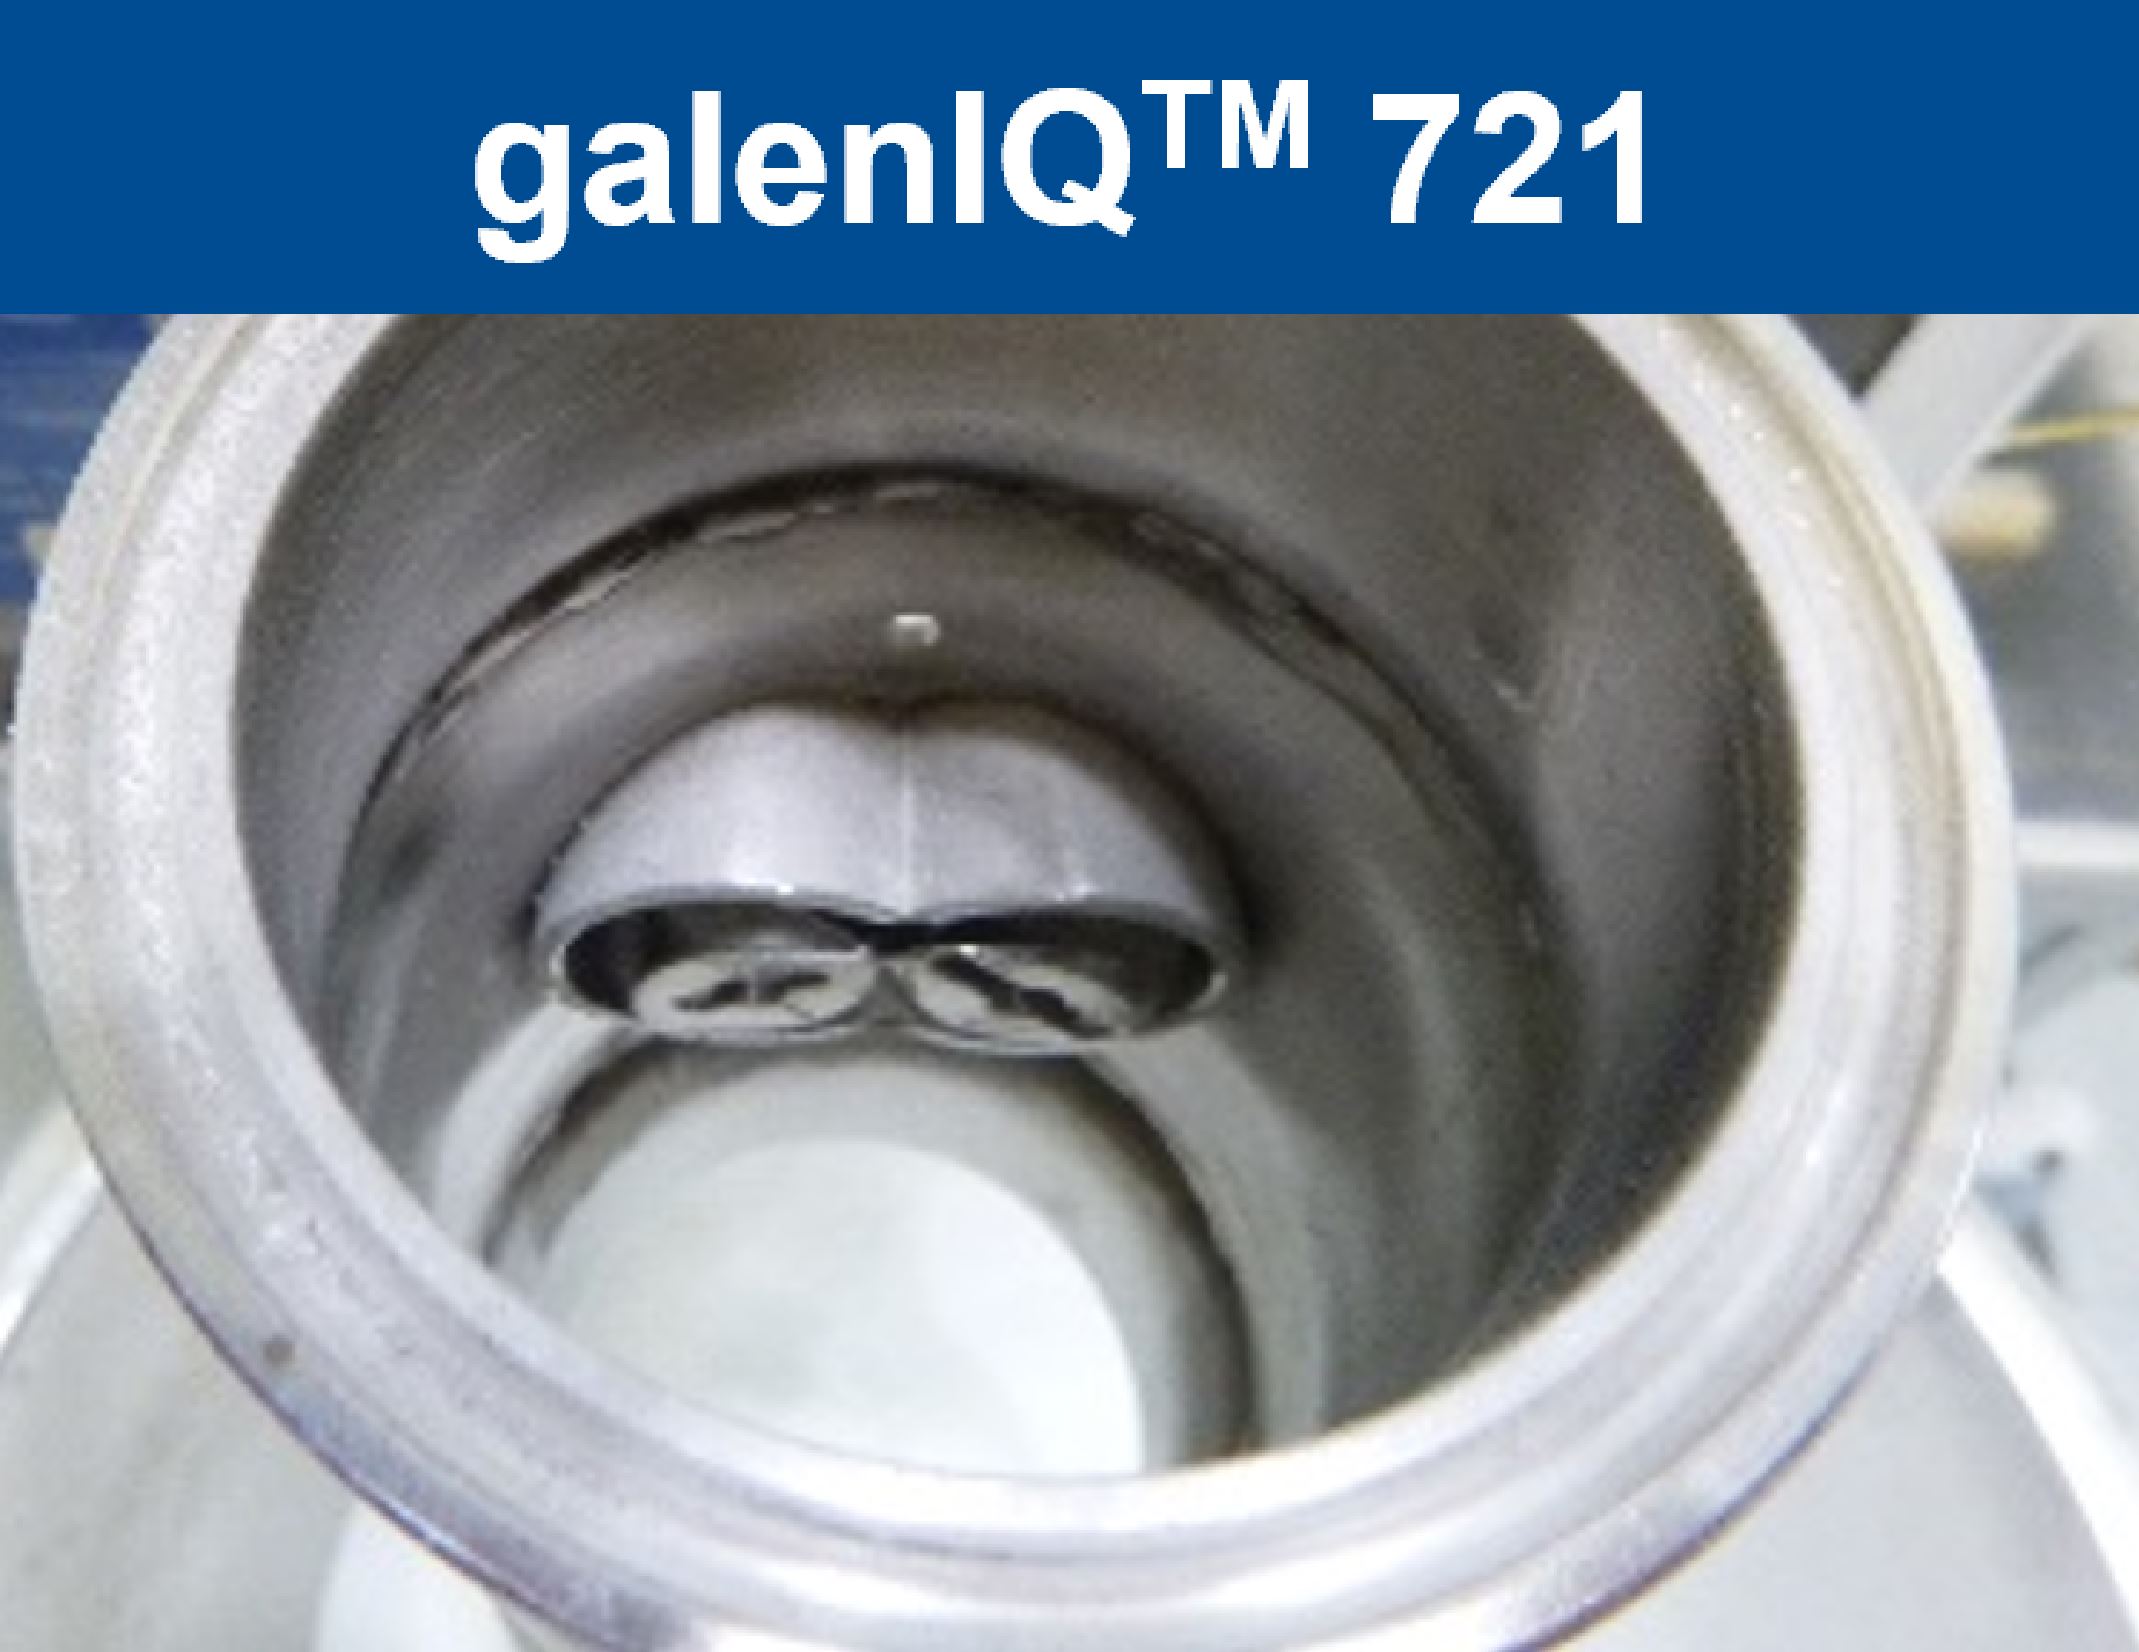 New study: BENEO’s galenIQ™ proves suitable for powder feeding in continuous manufacturing